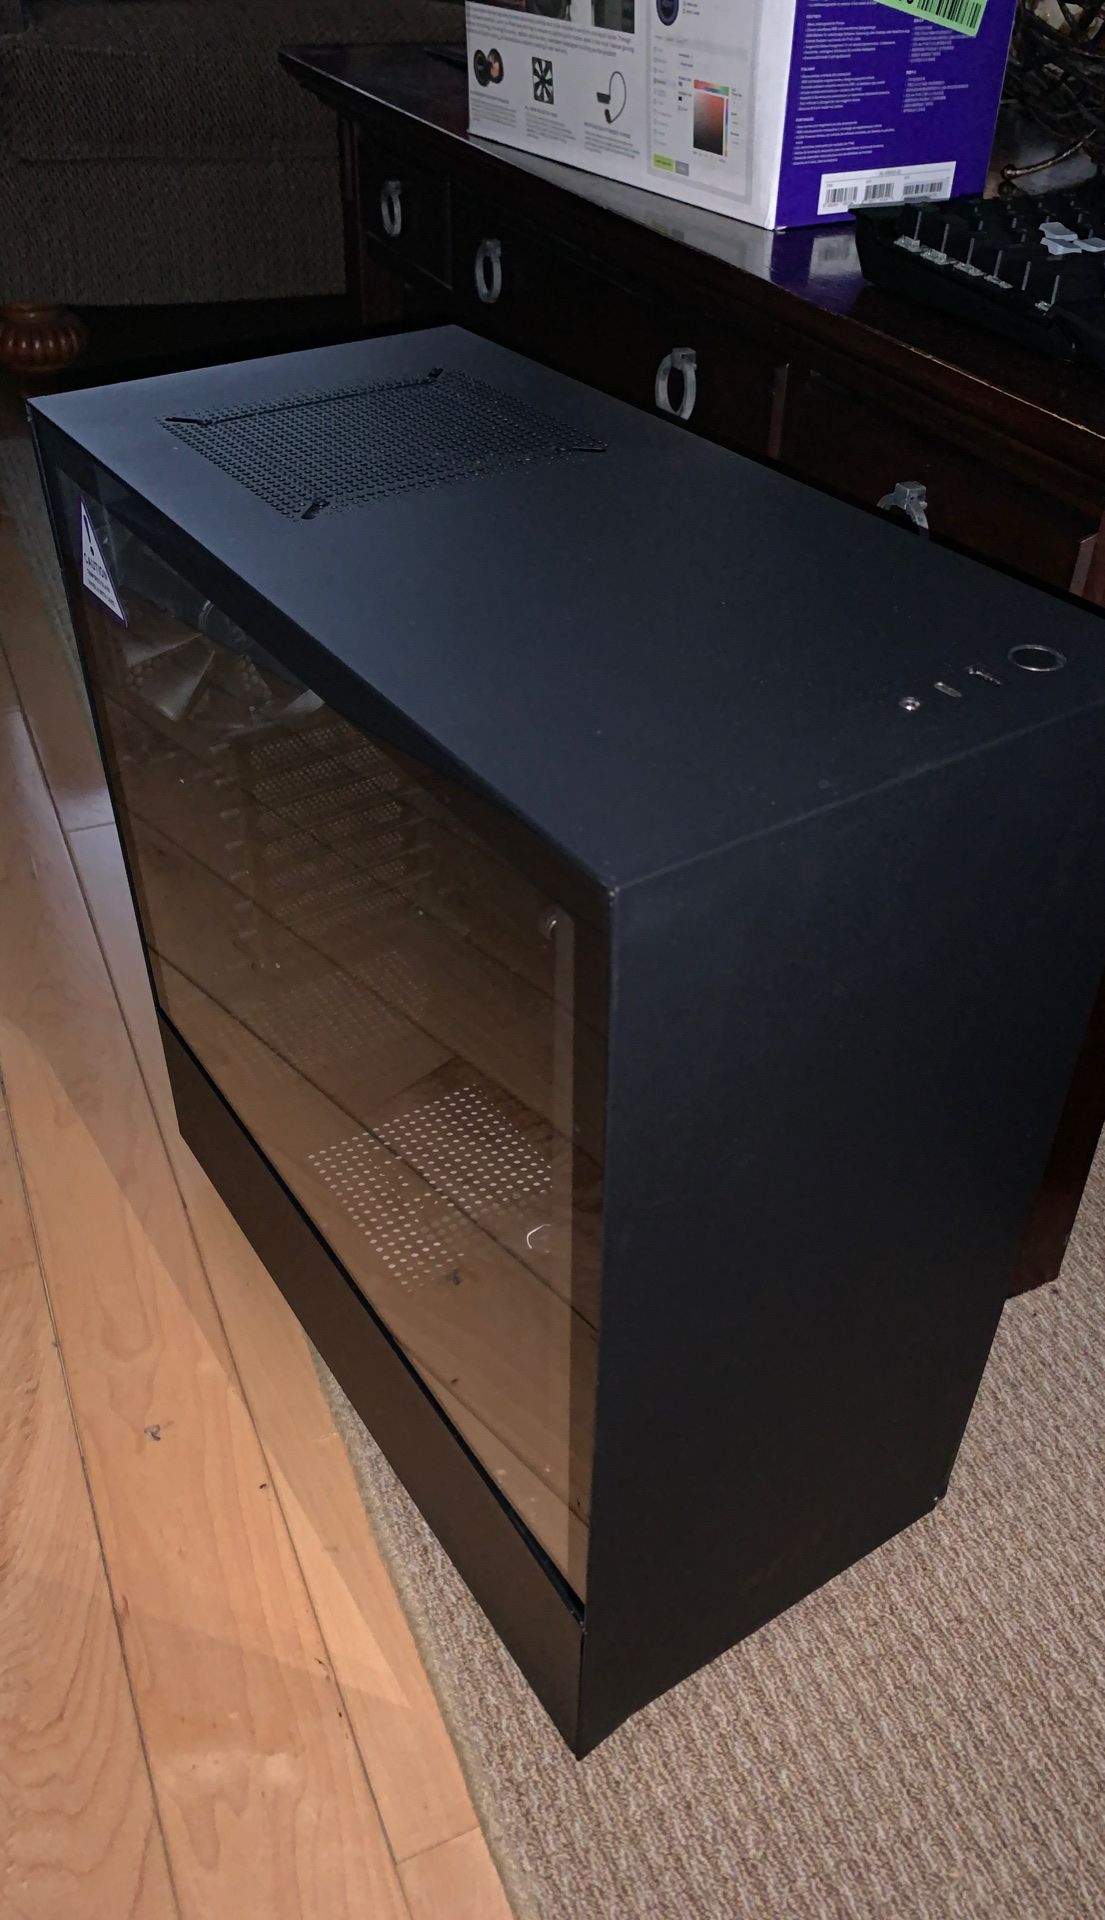 Nzxt h510 Gaming computer case